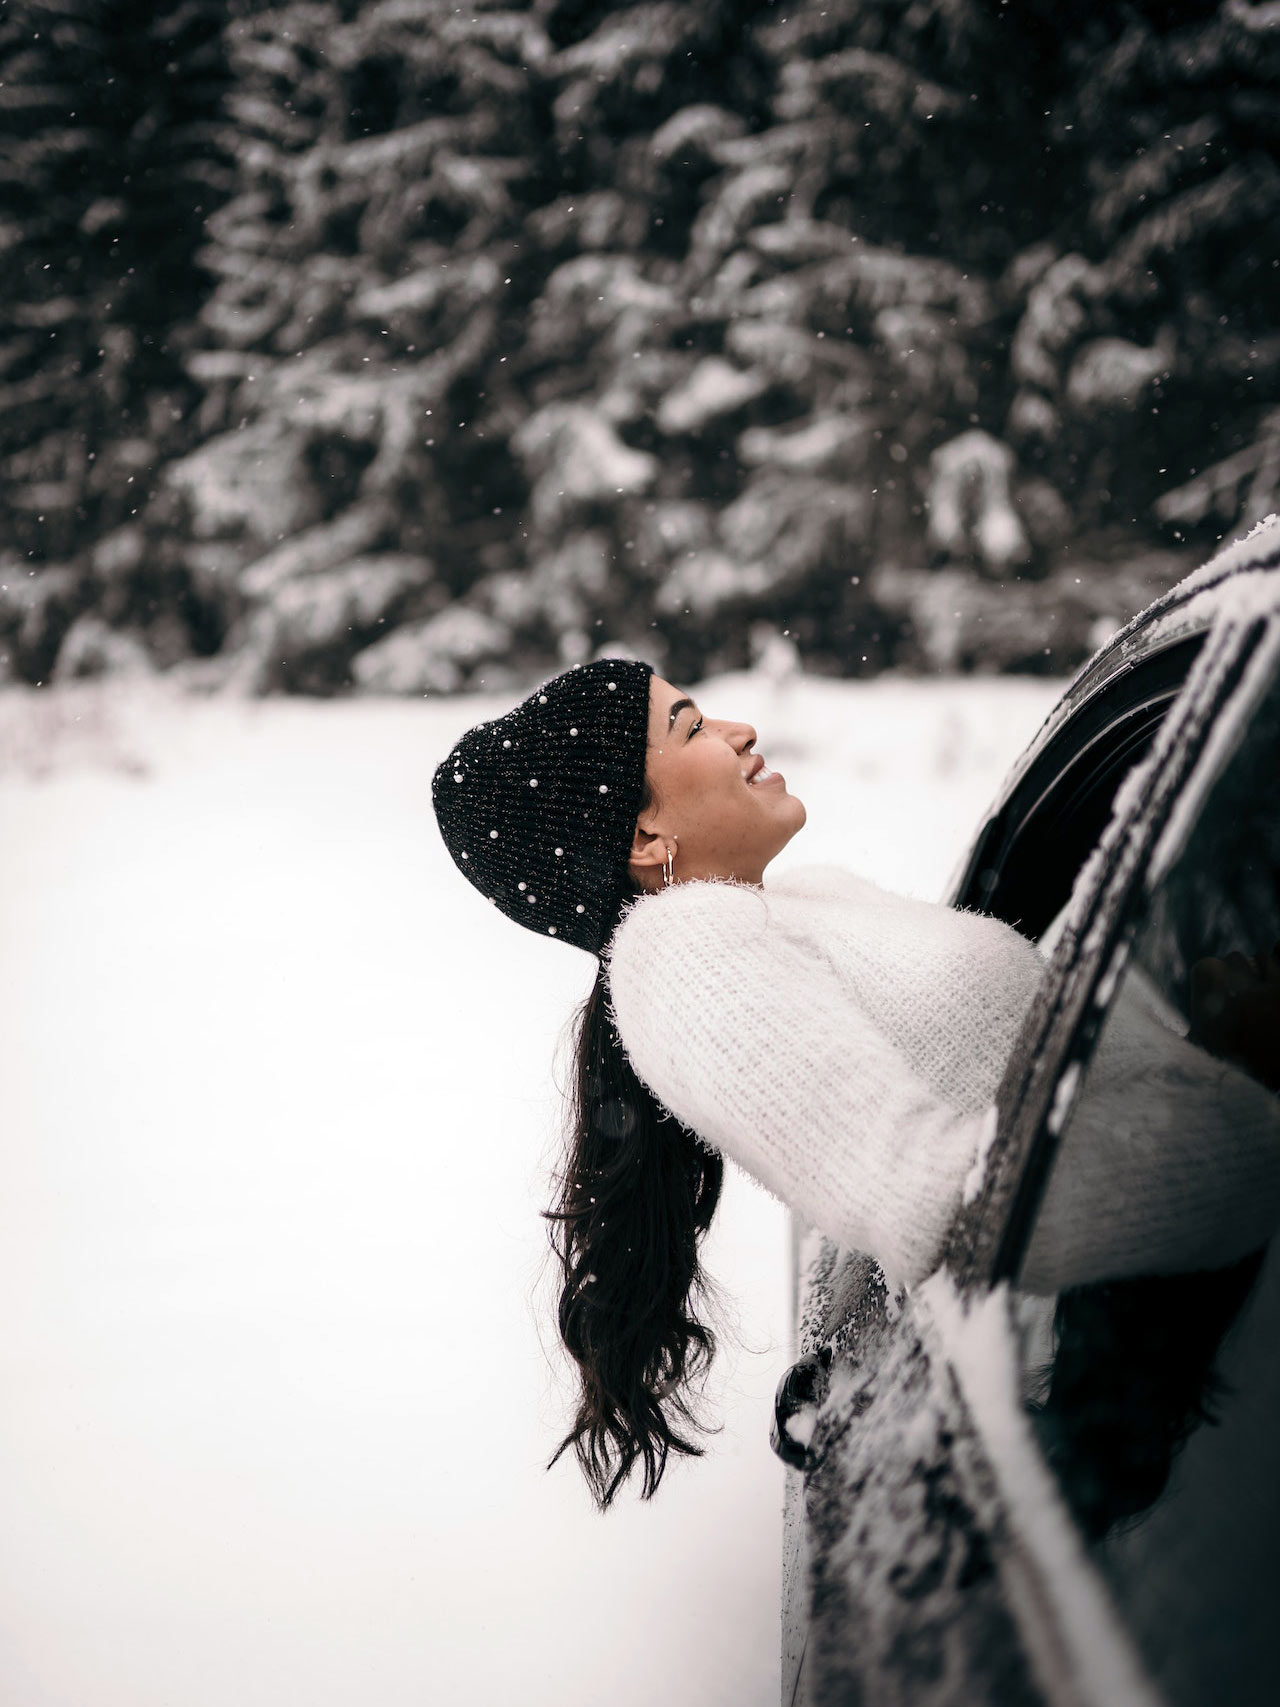 7 Winter Hair Care Tips for Women - Ting and Things